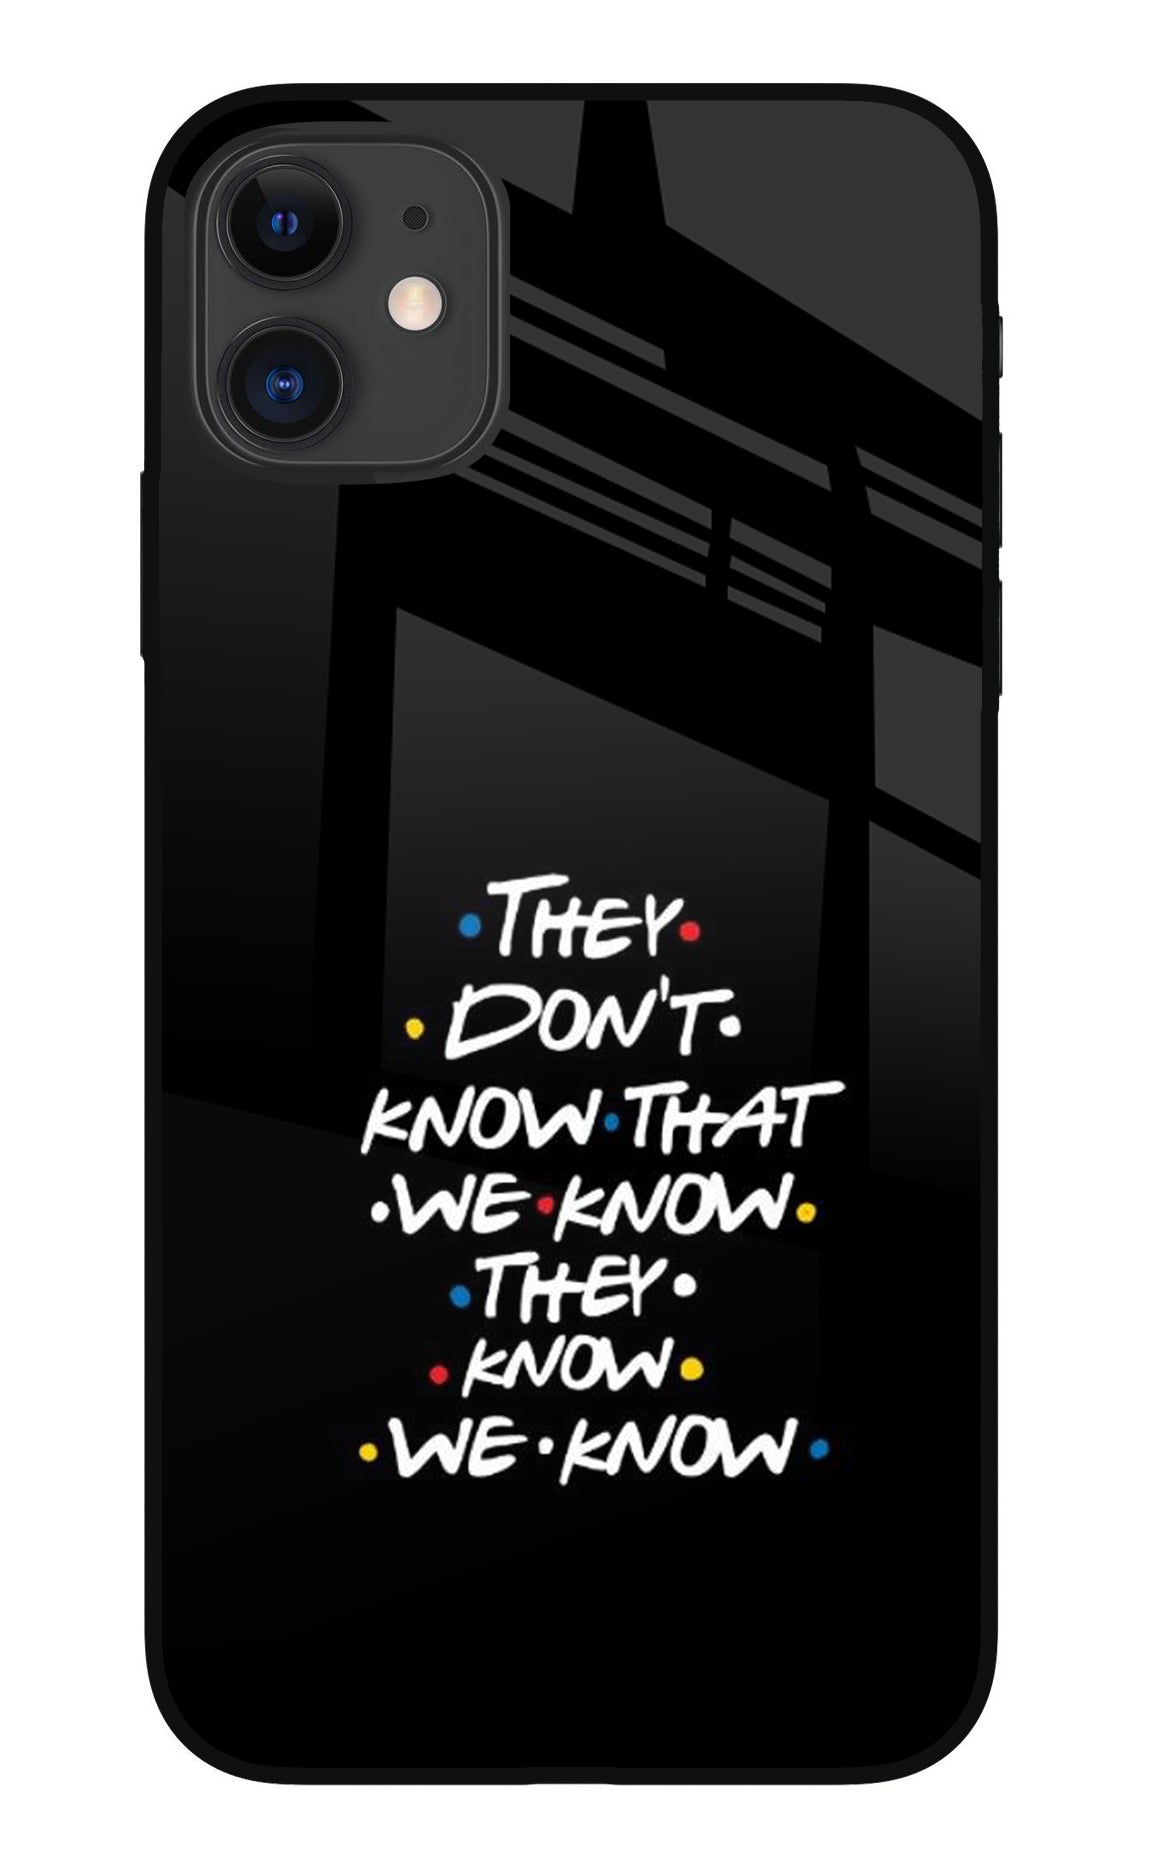 FRIENDS Dialogue iPhone 11 Back Cover